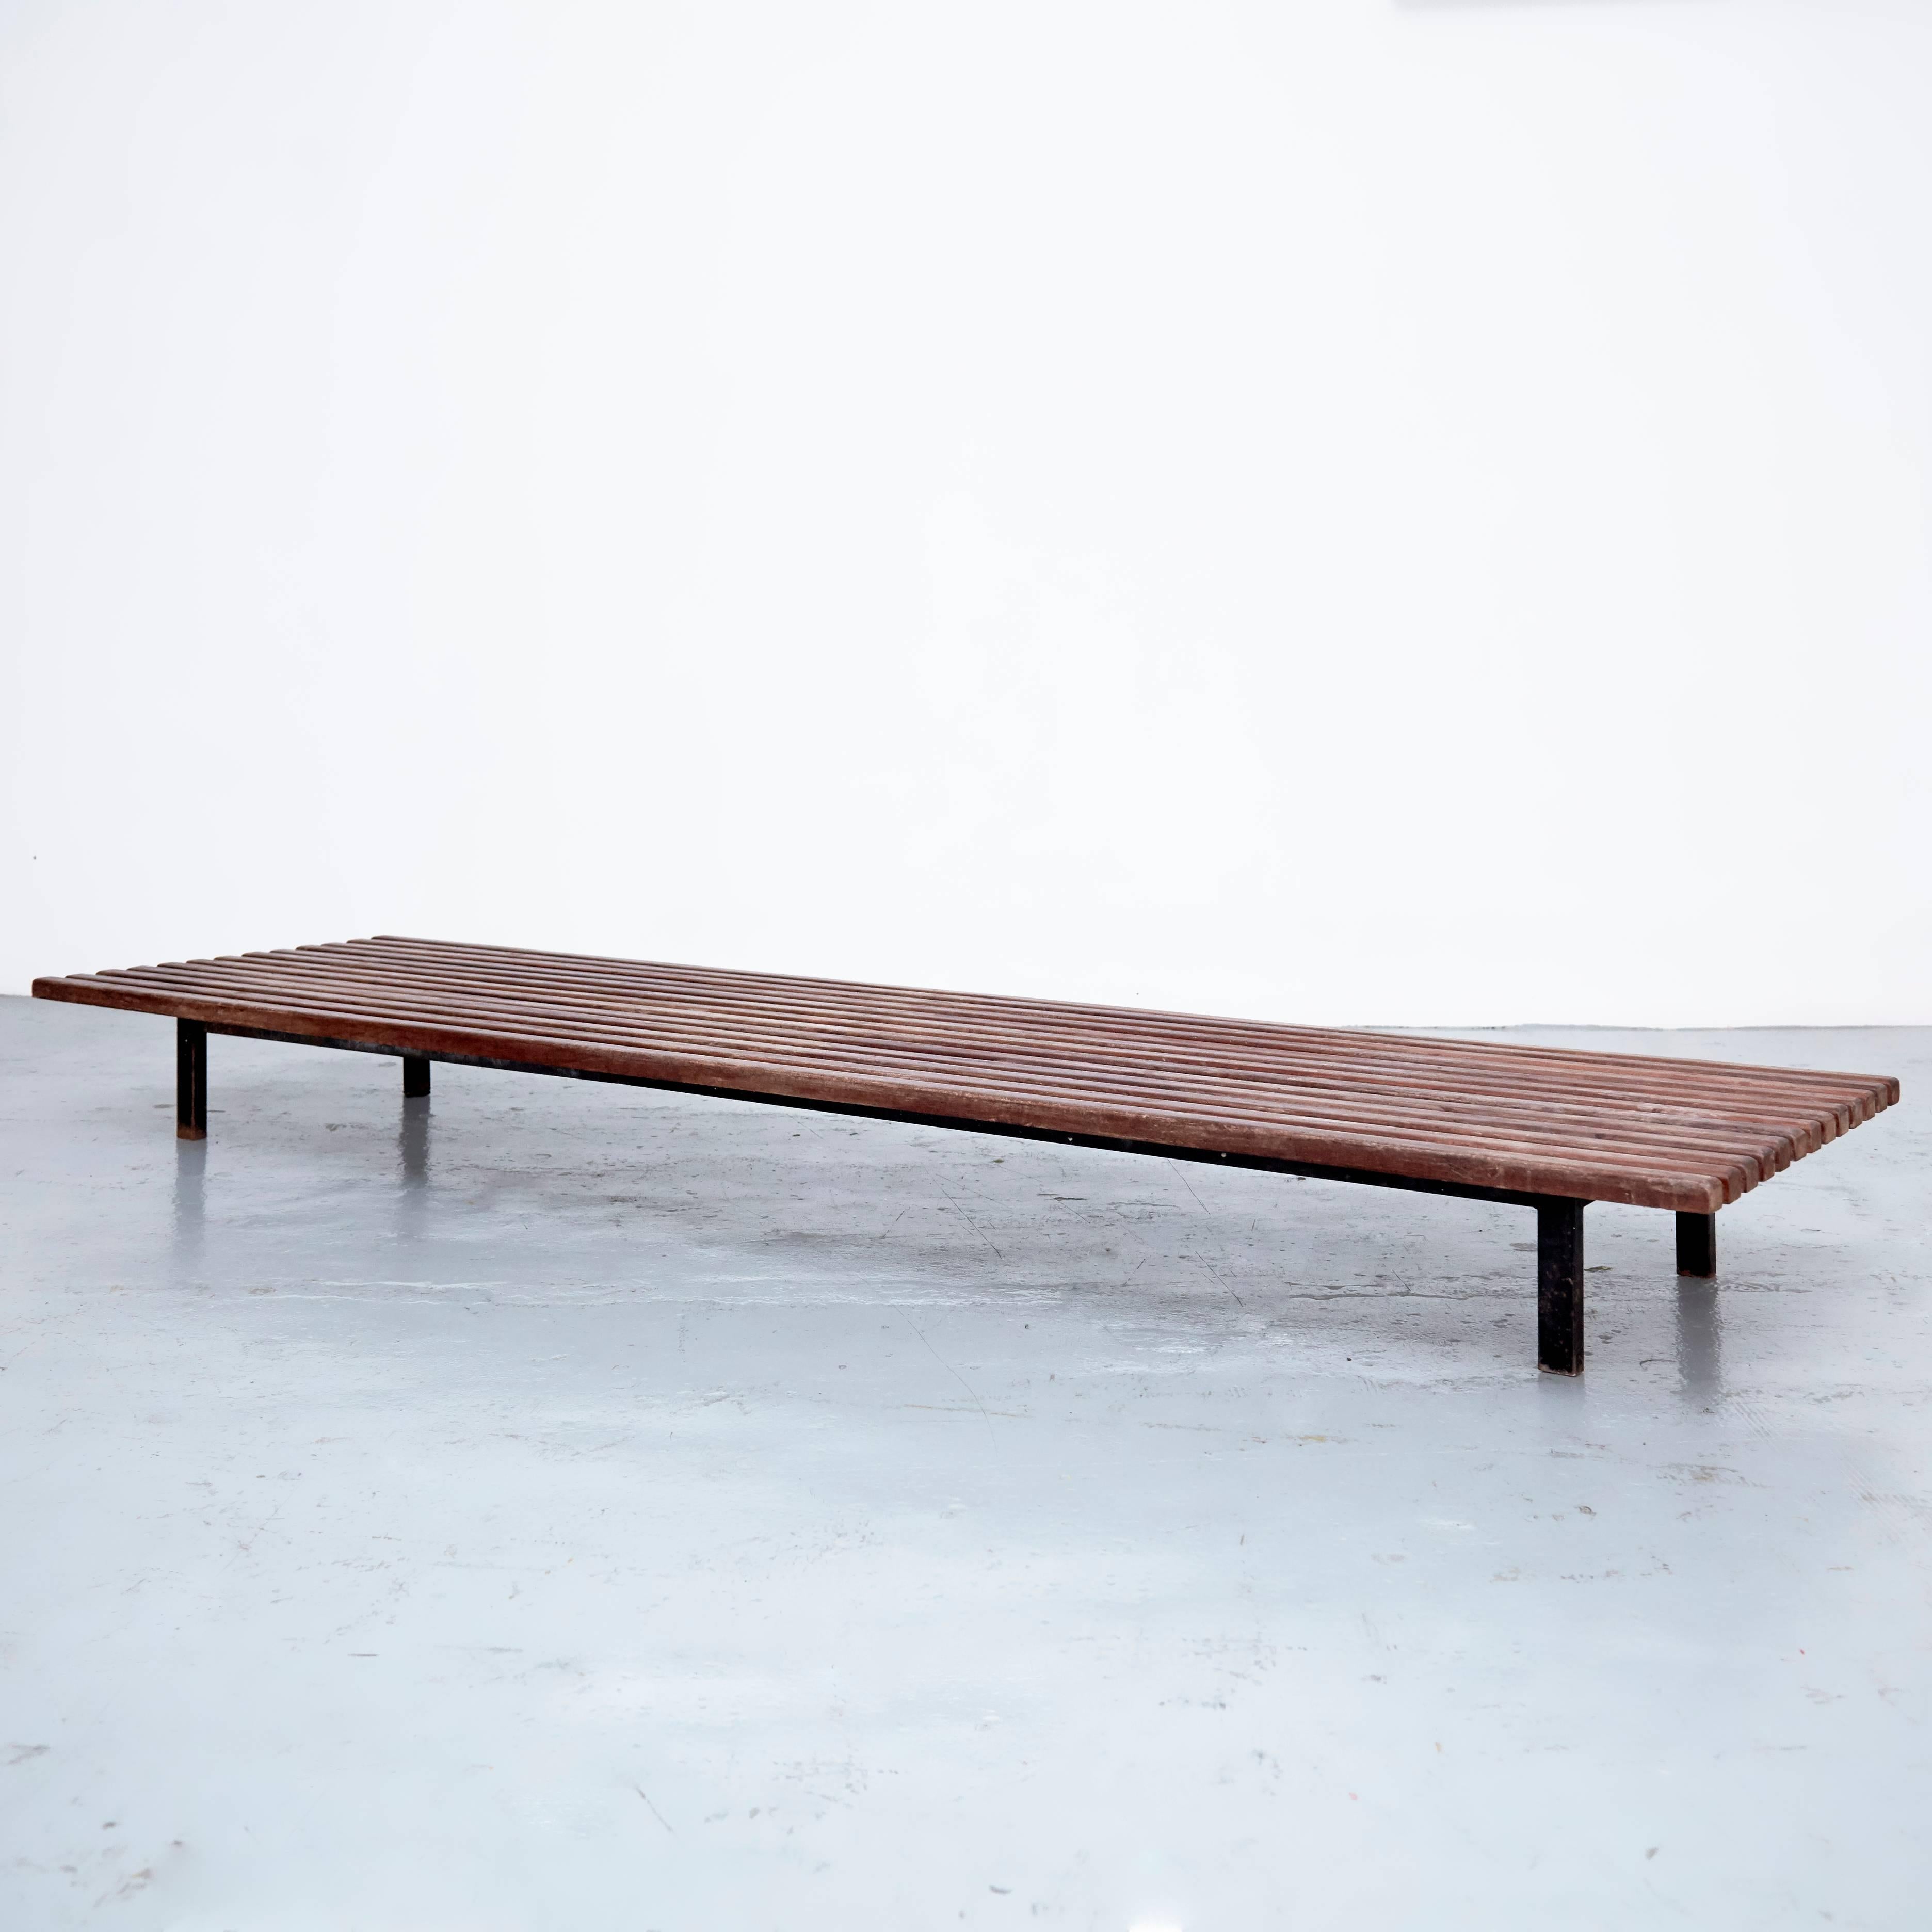 Bench designed by Charlotte Perriand, circa 1950.
This model is with 13 slats of wood.
Edited by Steph Simon.

Wood, metal frame legs.

Provenance: Cansado, Mauritania (Africa).

In good original condition, with minor wear consistent with